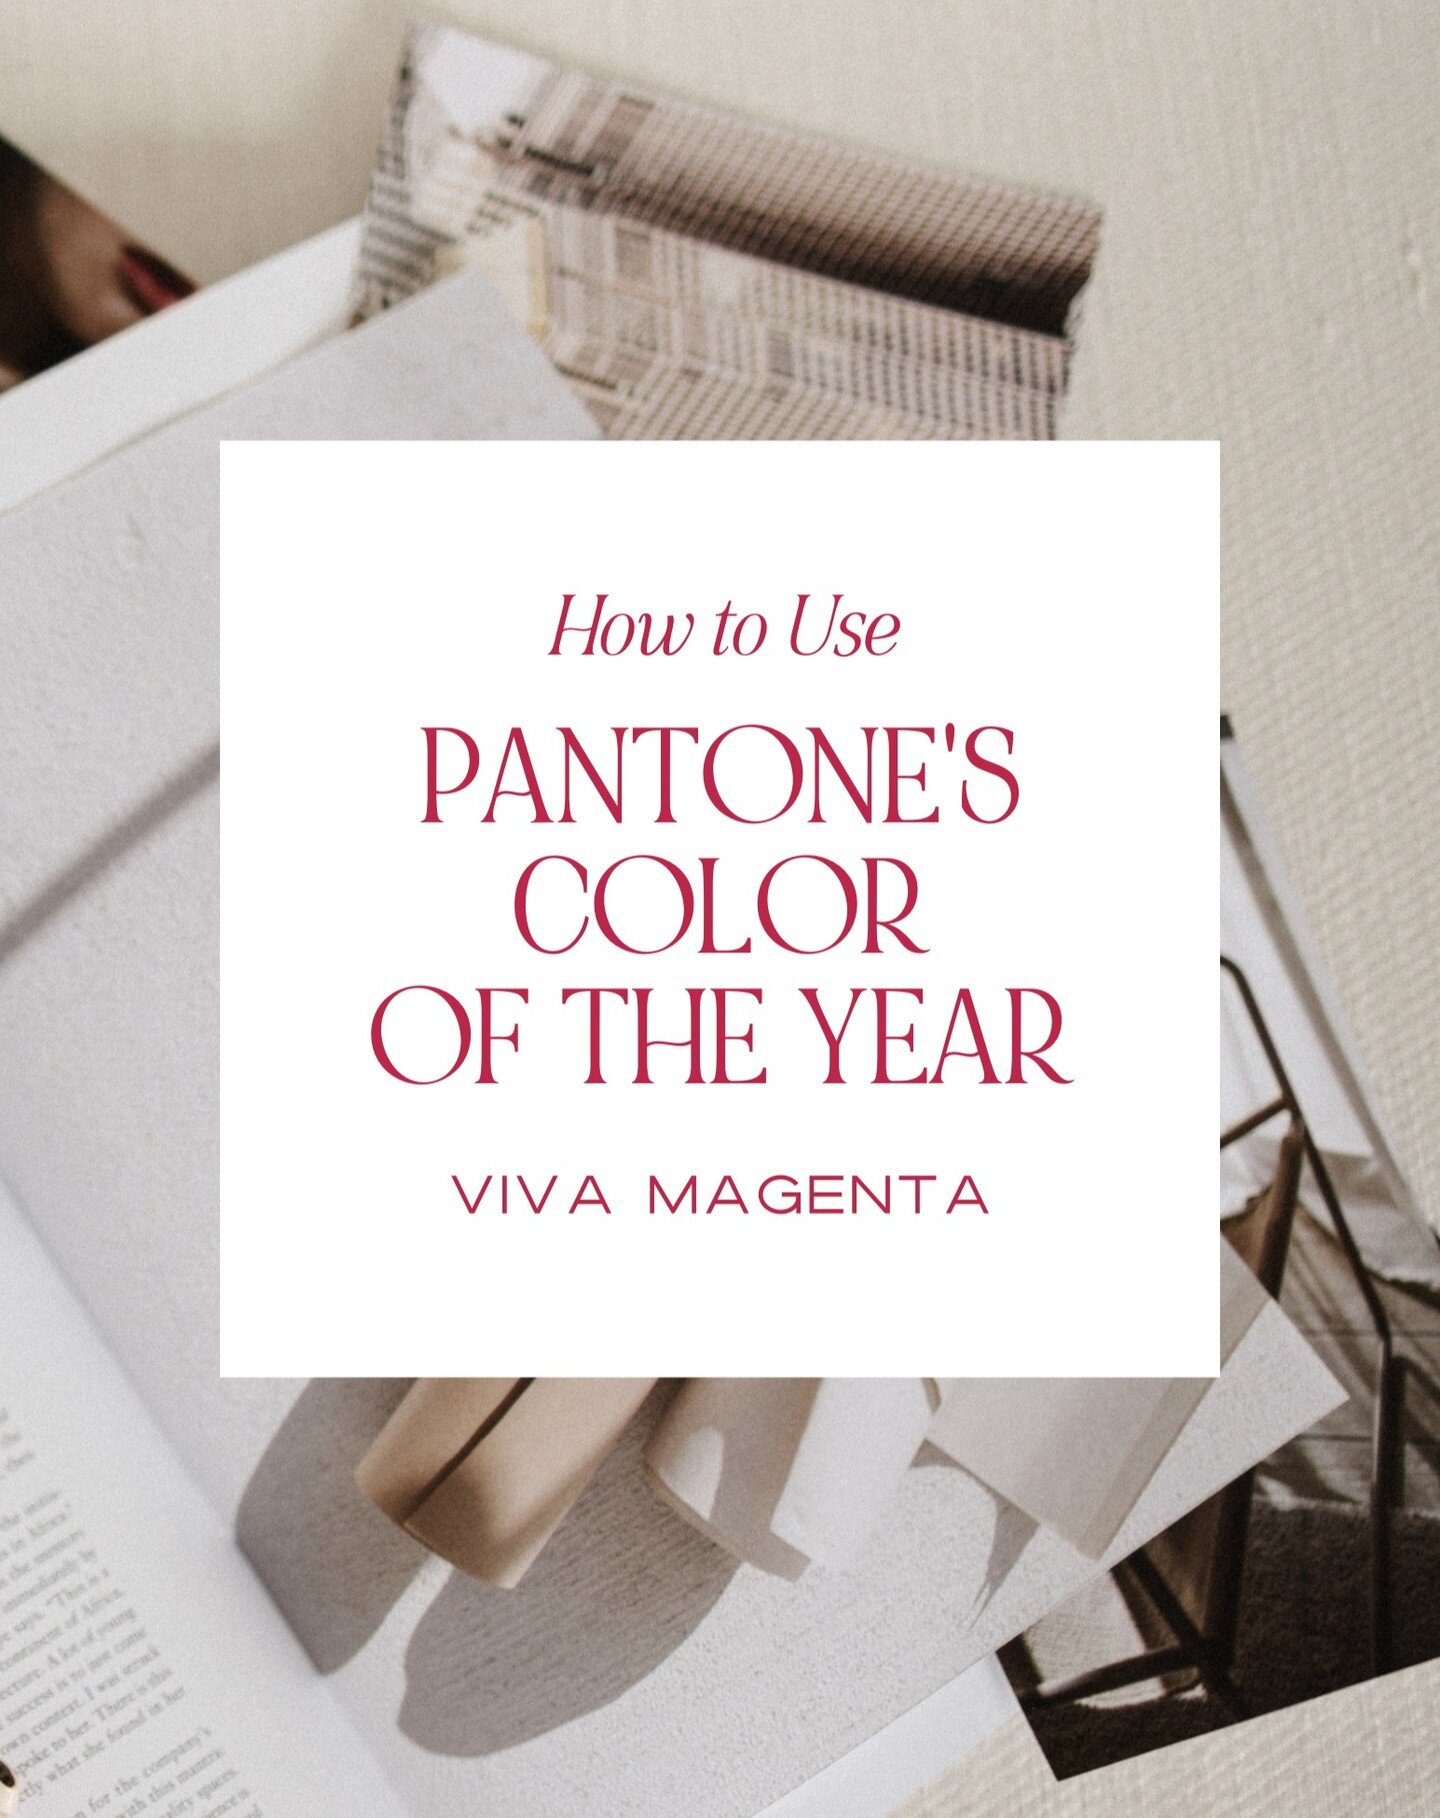 Pantone's color of the year always throws us for a loop - do we love it or hate it?

Let us know your thoughts in the comments! 💛

The 2023 color of the year: Viva Magenta is a warm, vibrant, pink-red color that represents &quot;optimistic celebrati